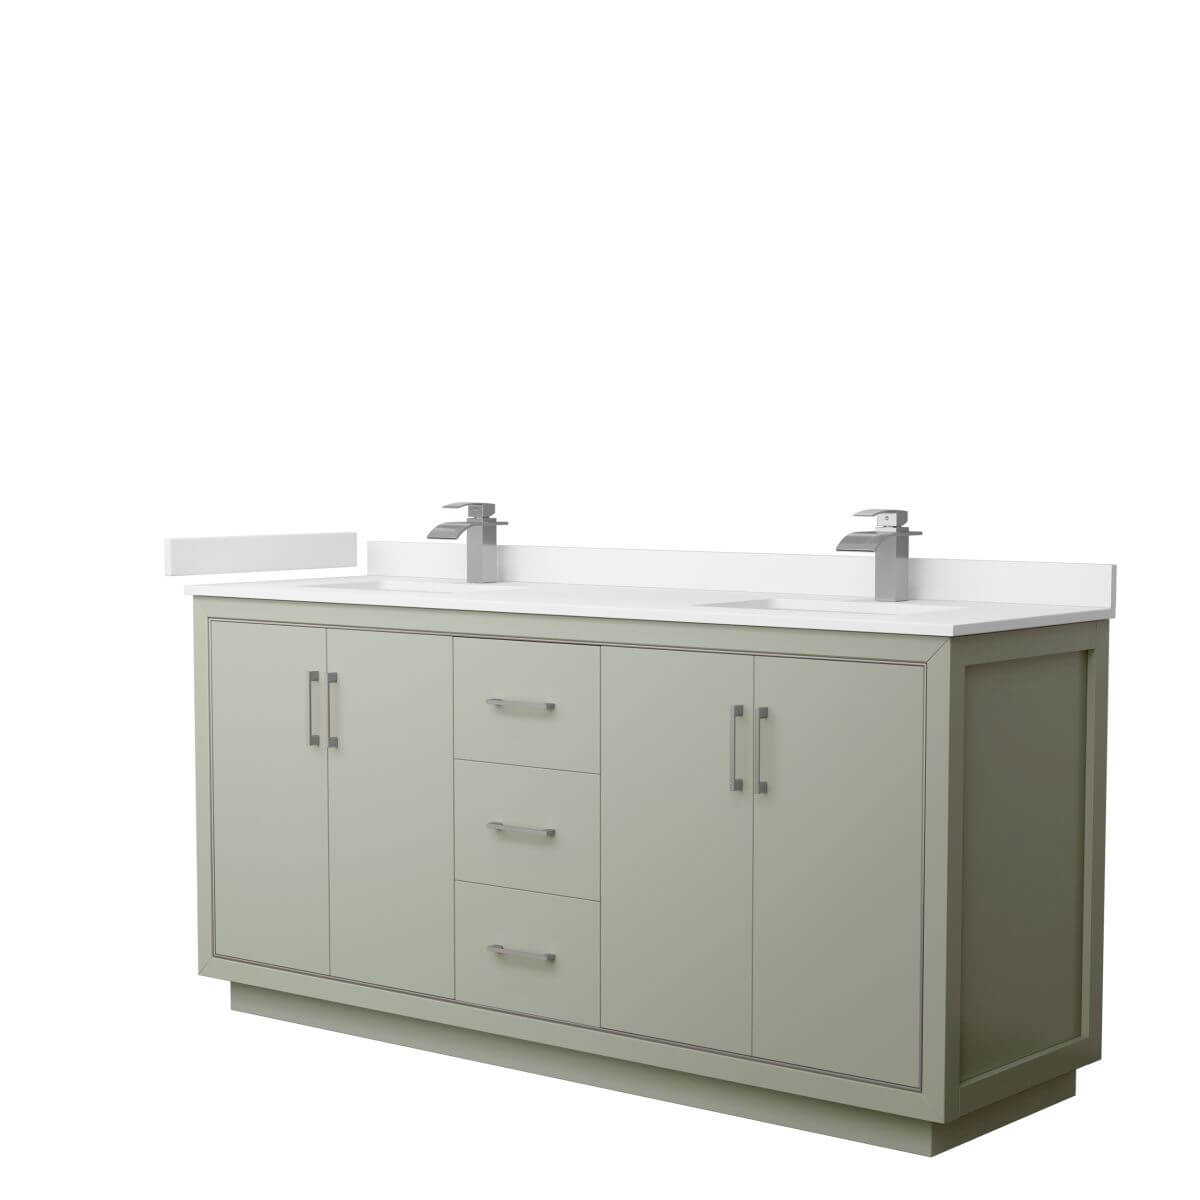 Wyndham Collection WCF111172DLGWCUNSMXX Icon 72 inch Double Bathroom Vanity in Light Green with White Cultured Marble Countertop, Undermount Square Sinks and Brushed Nickel Trim